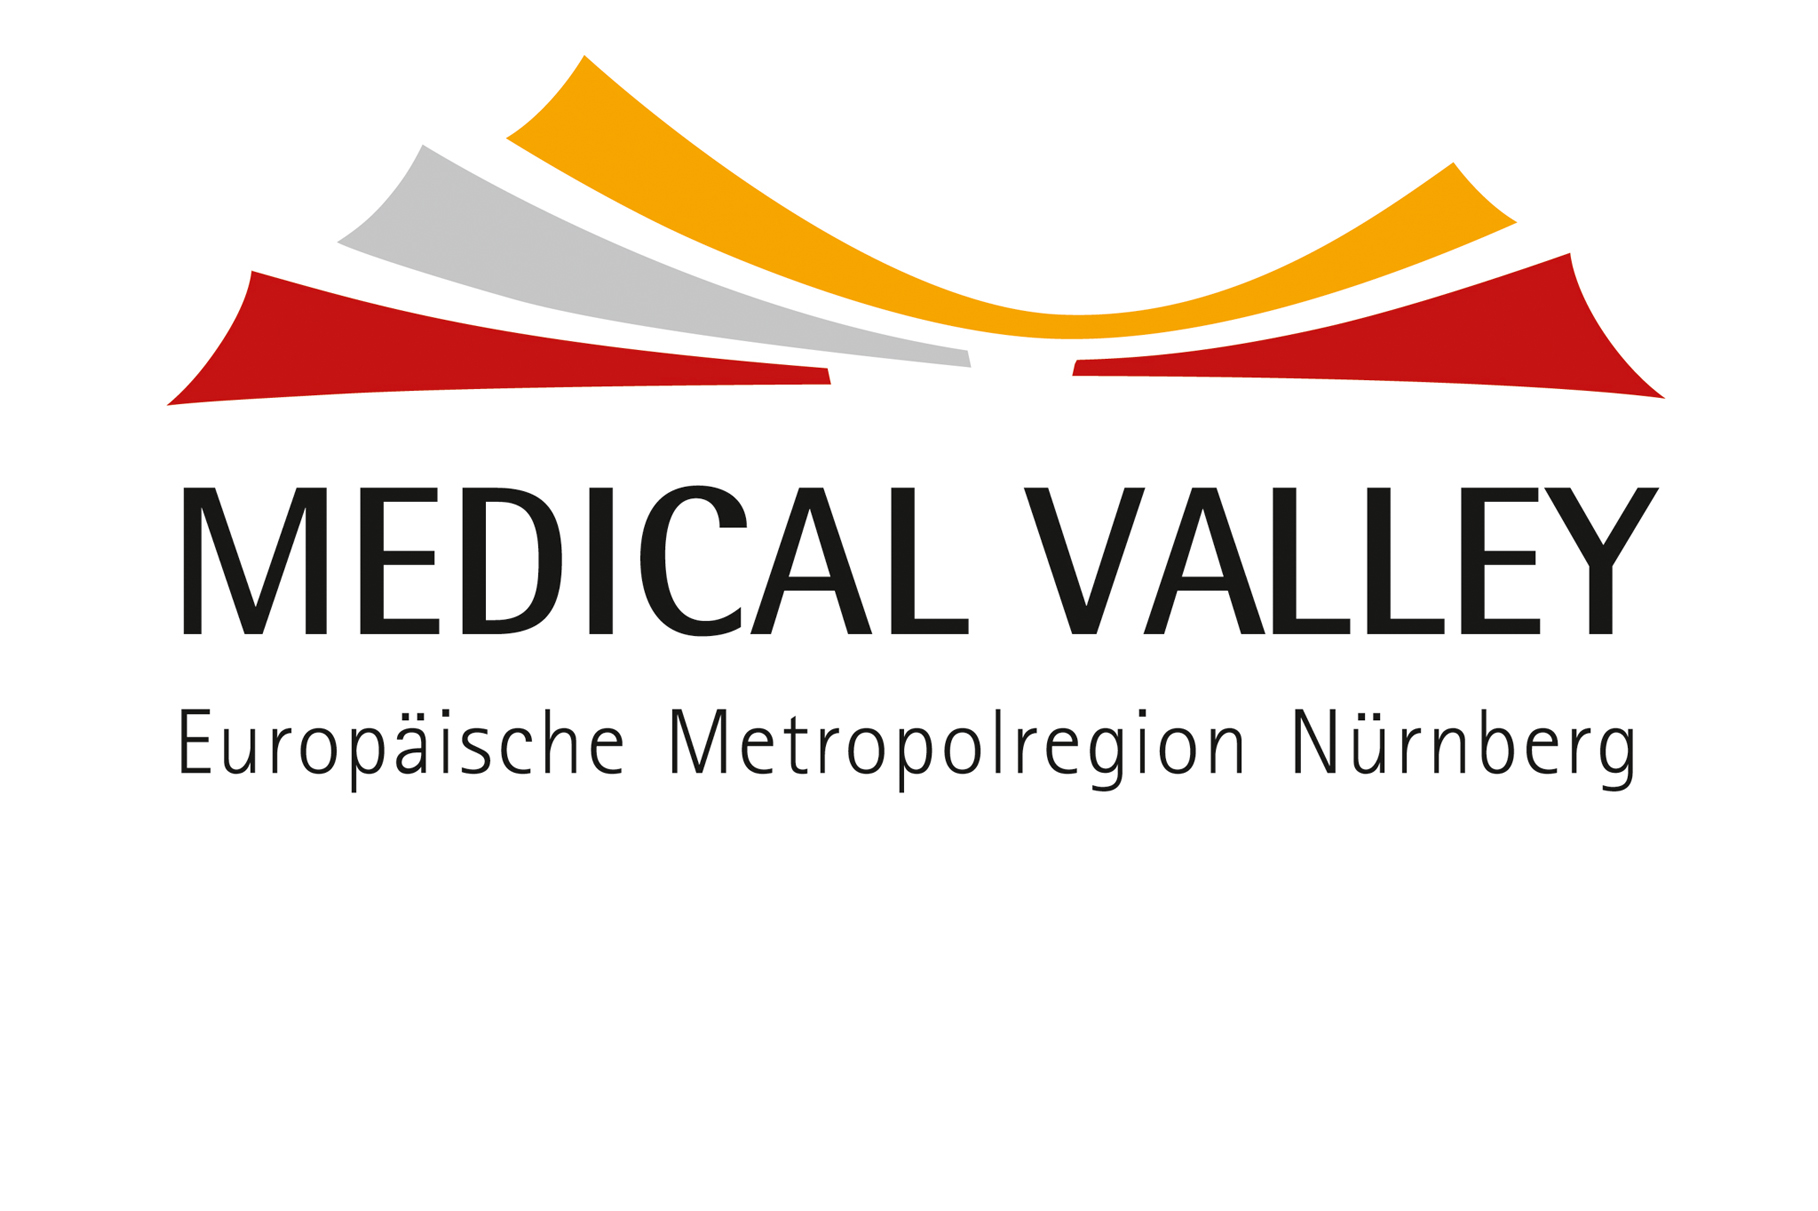 Towards page "Medical Valley